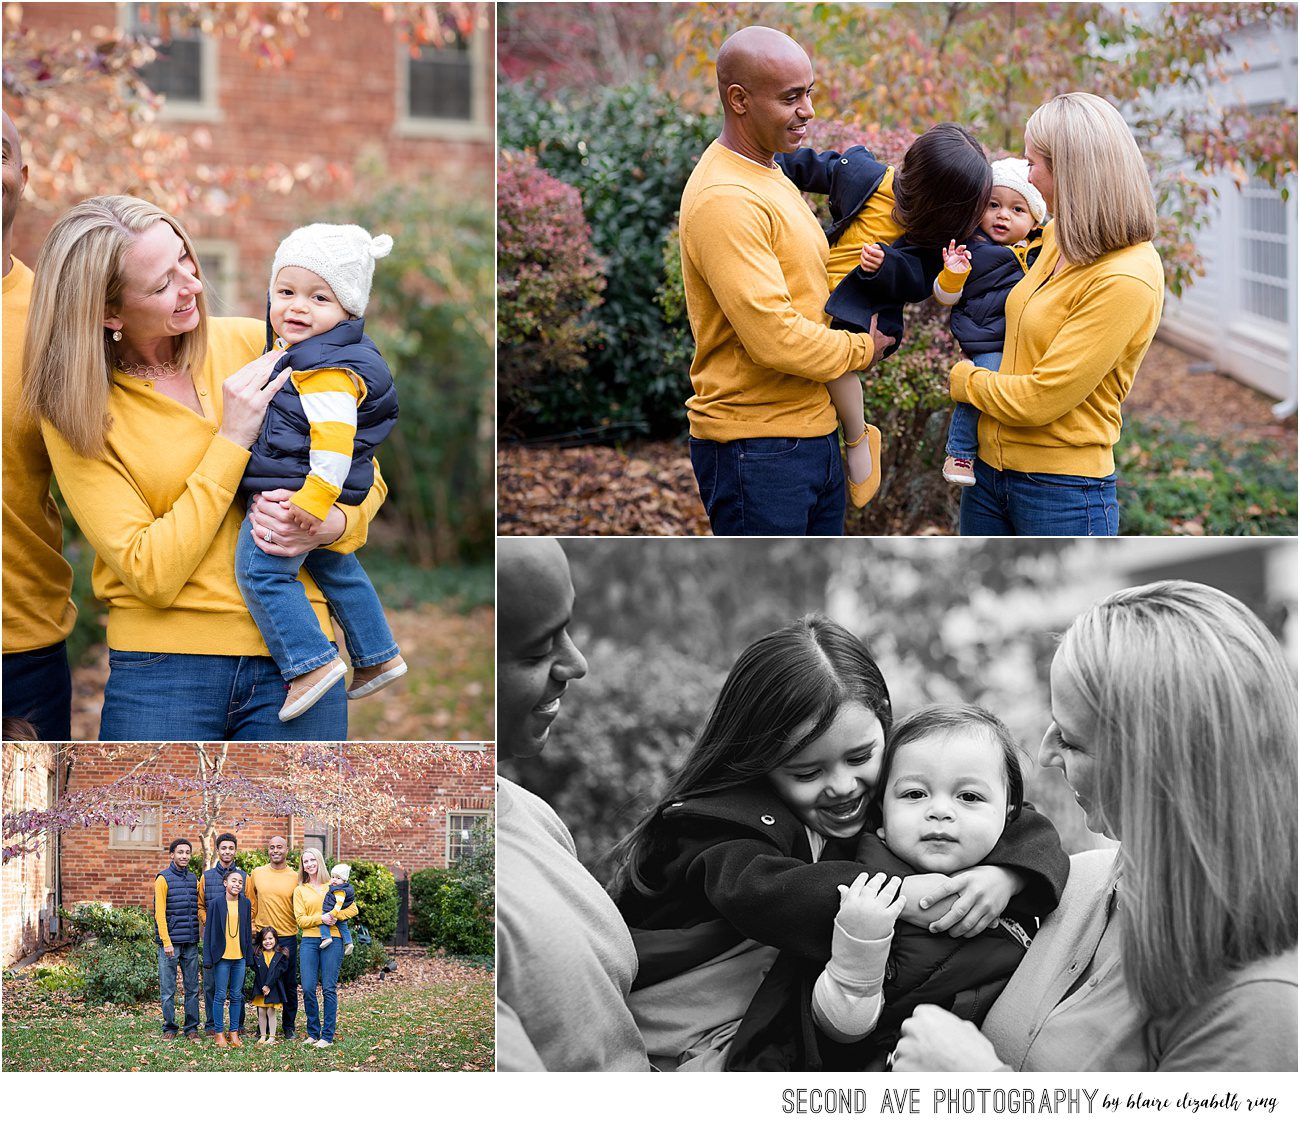 Beautiful blended family of 7. Downtown Leesburg VA photographer specializing in newborns and childhood photography now accepting 2018 sessions in NoVa.